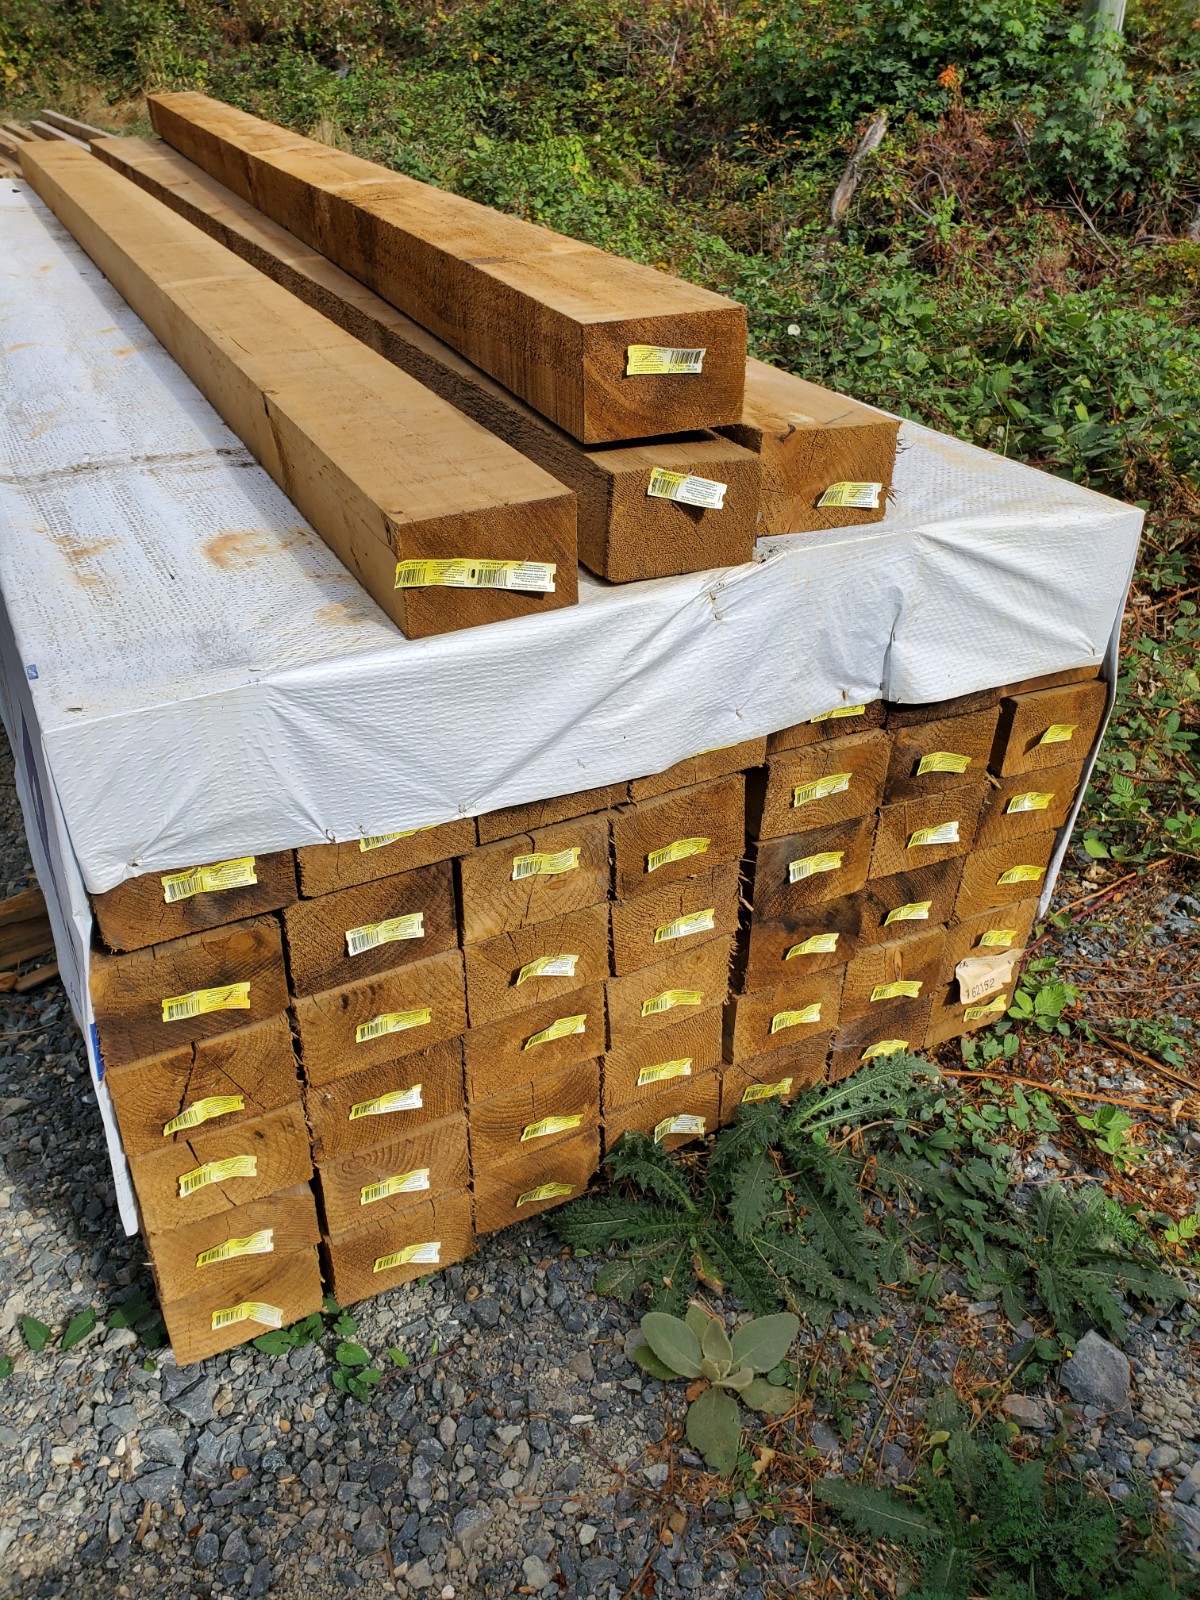 Cutter Lumber and metal sales Victoria (778)700-2289